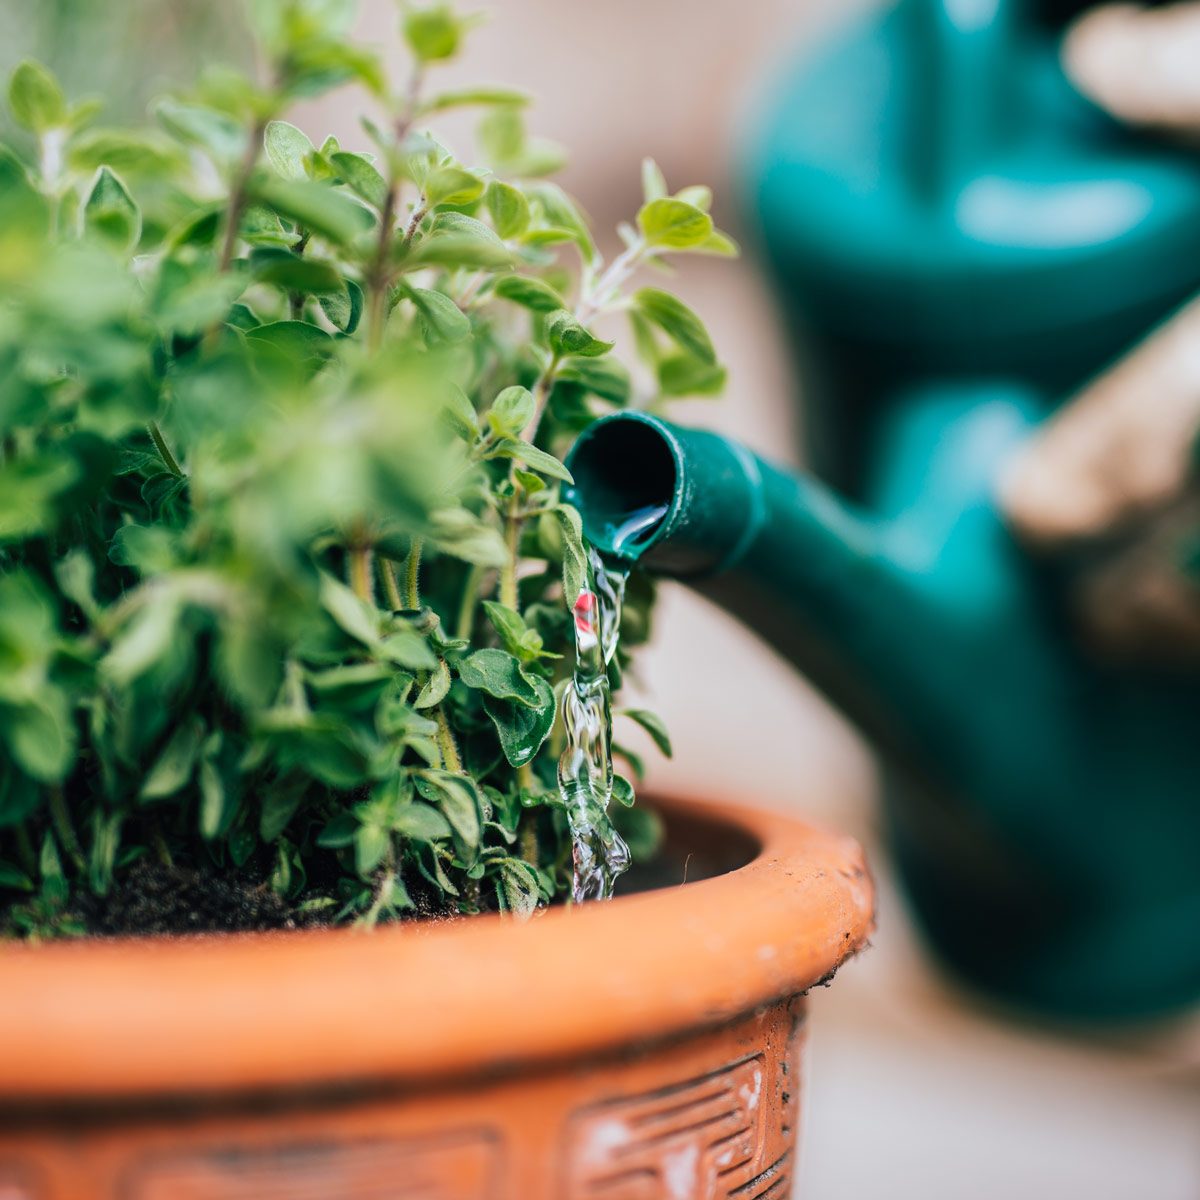 7 Tips on How to Conserve Water in the Garden